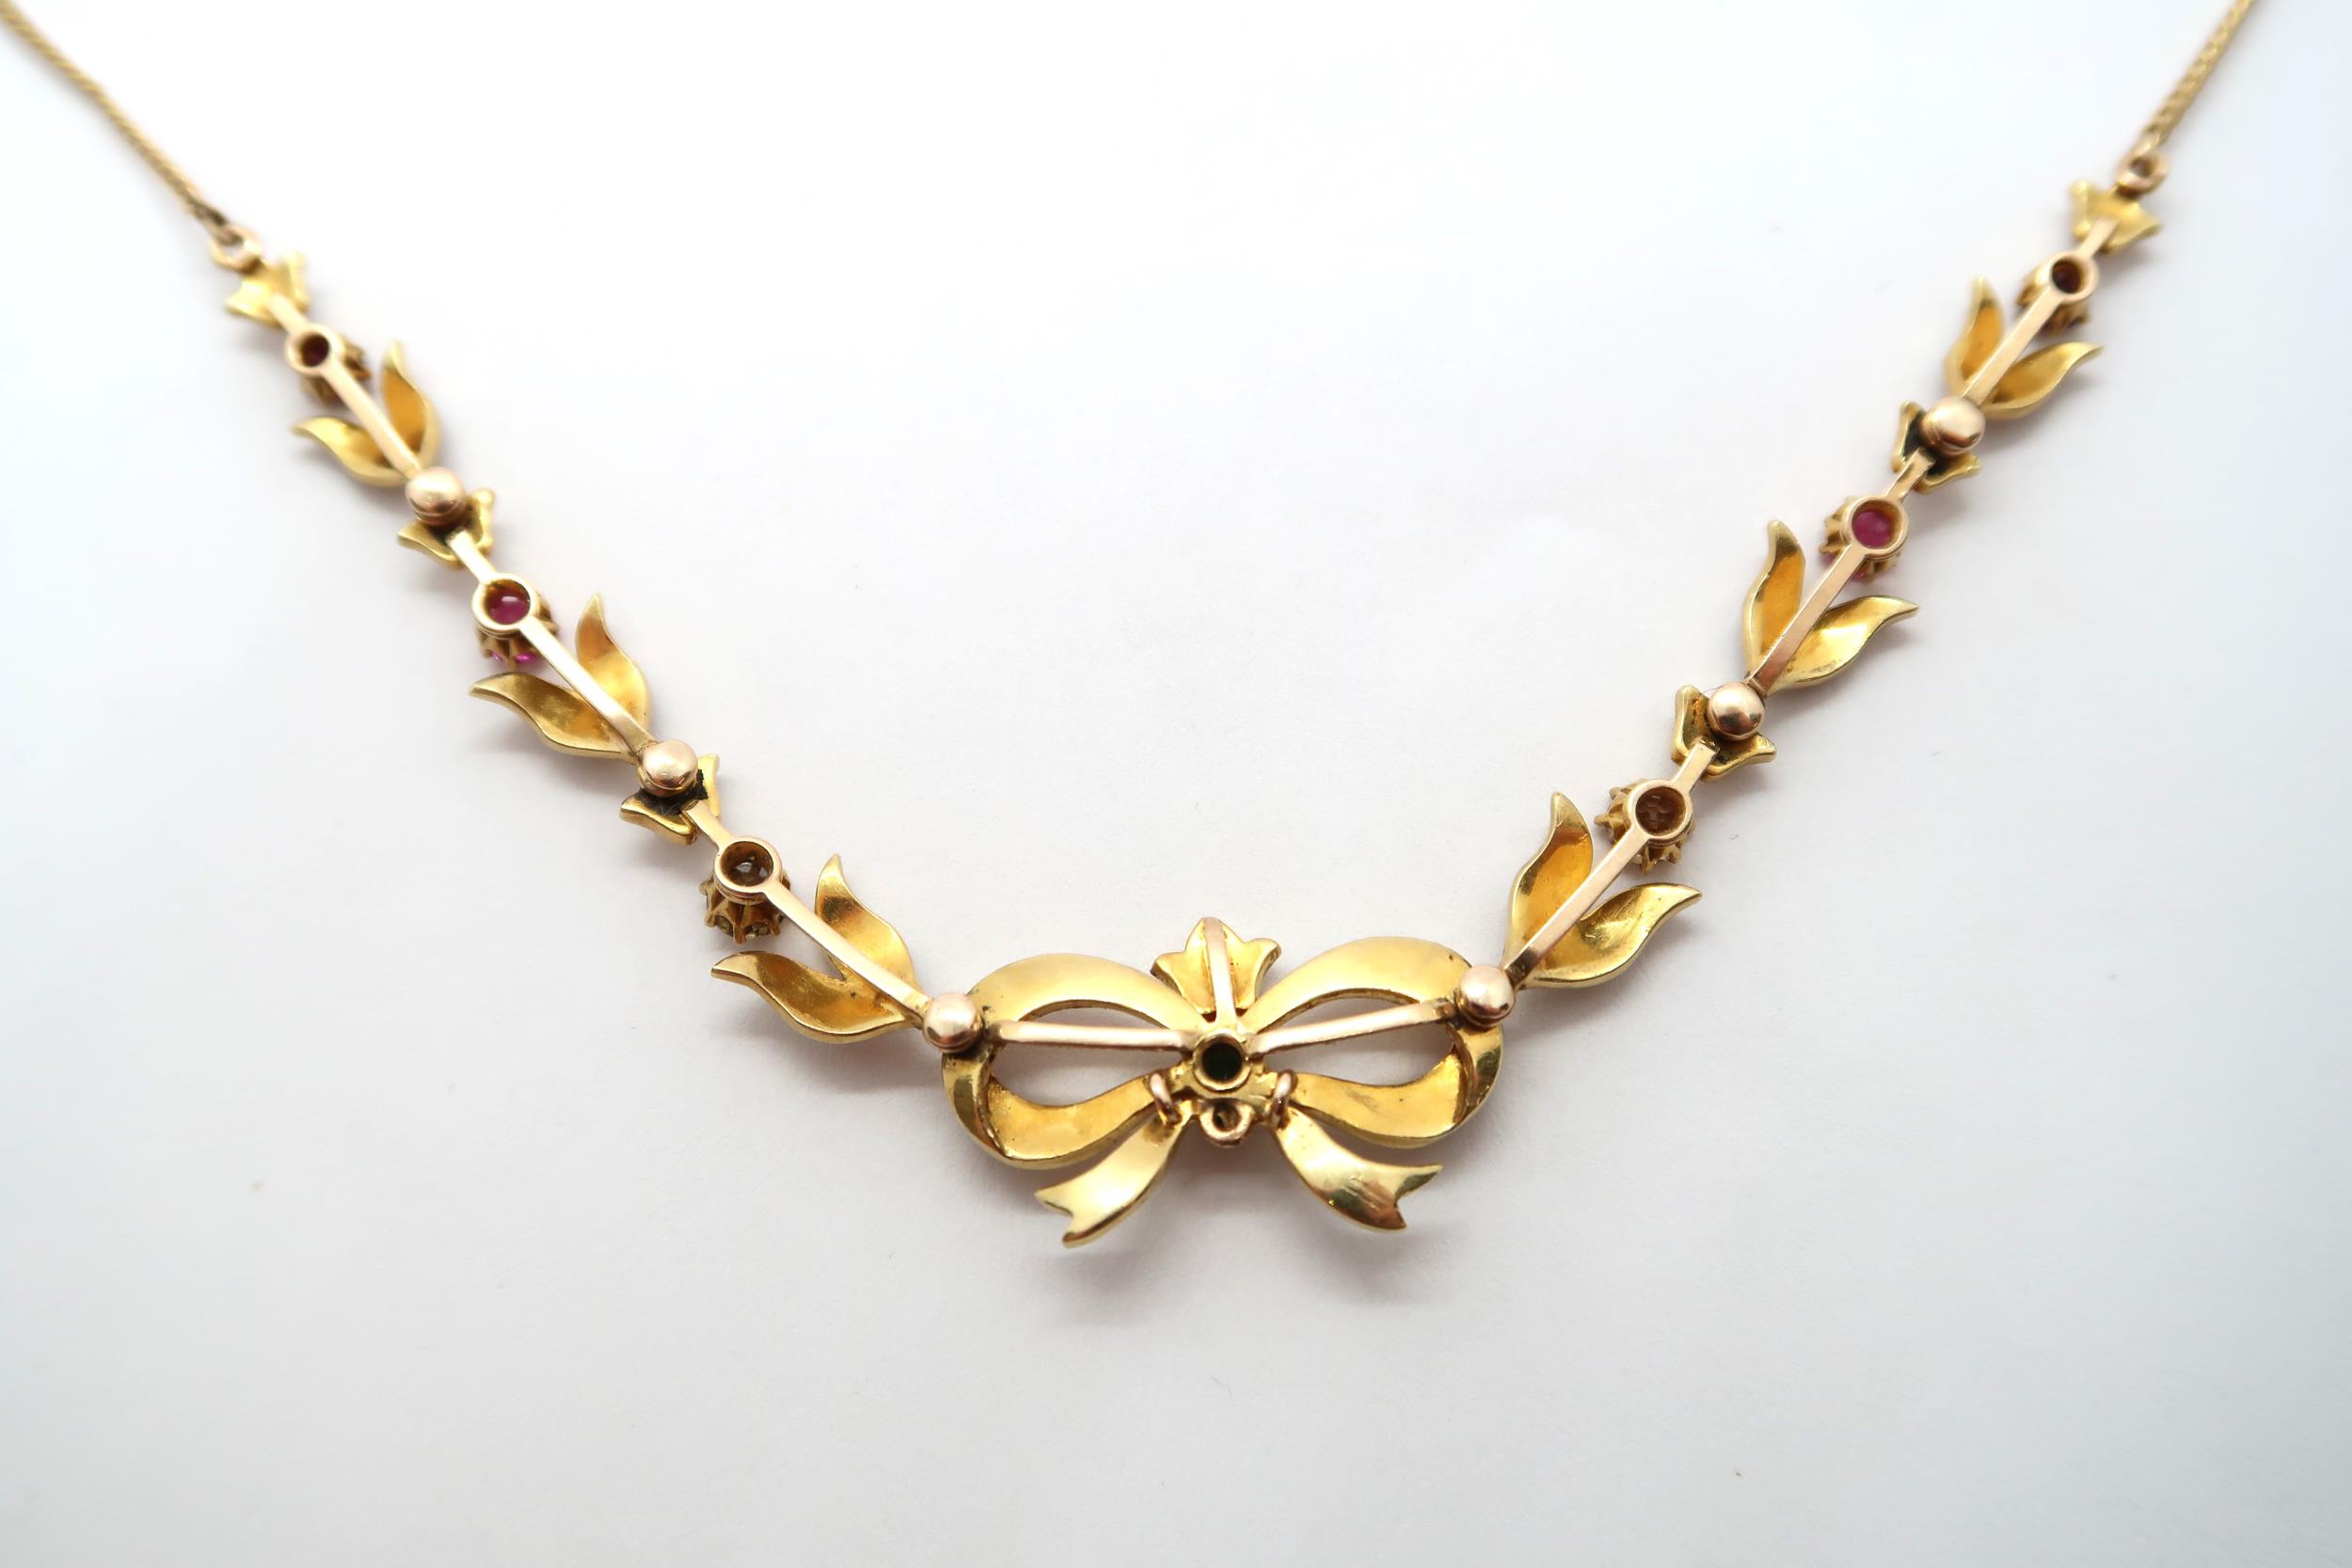 A seed pearl and gem set necklace, with central bow and foliate lines to the curb link chain. Gems - Image 6 of 6